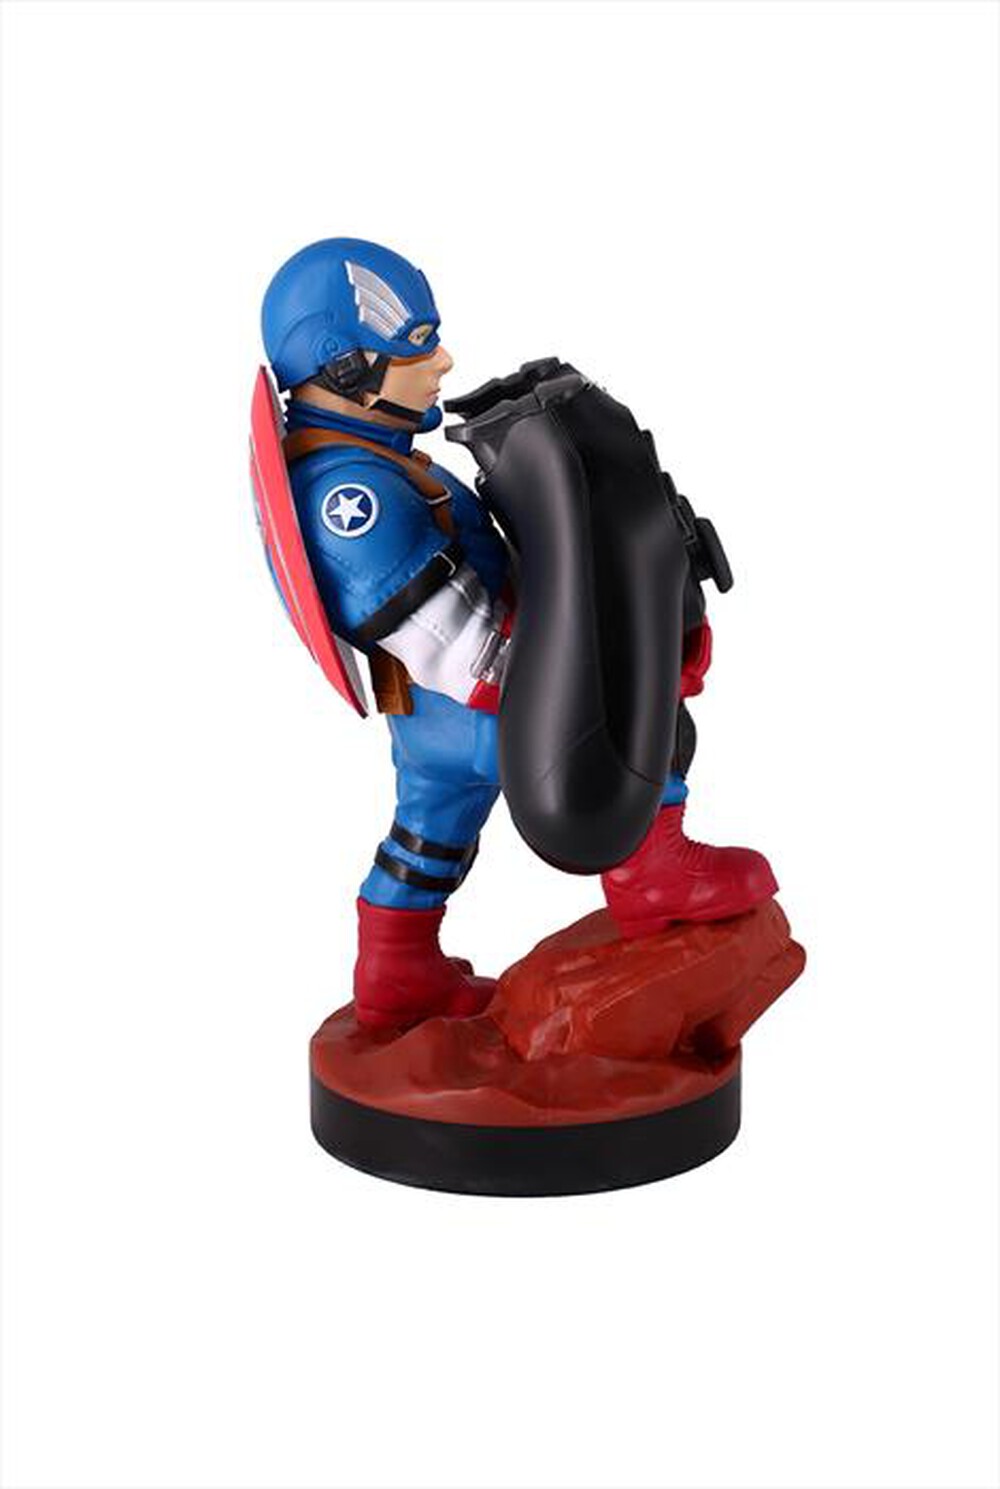 "EXQUISITE GAMING - CAPTAIN AMERICA CABLE GUY"